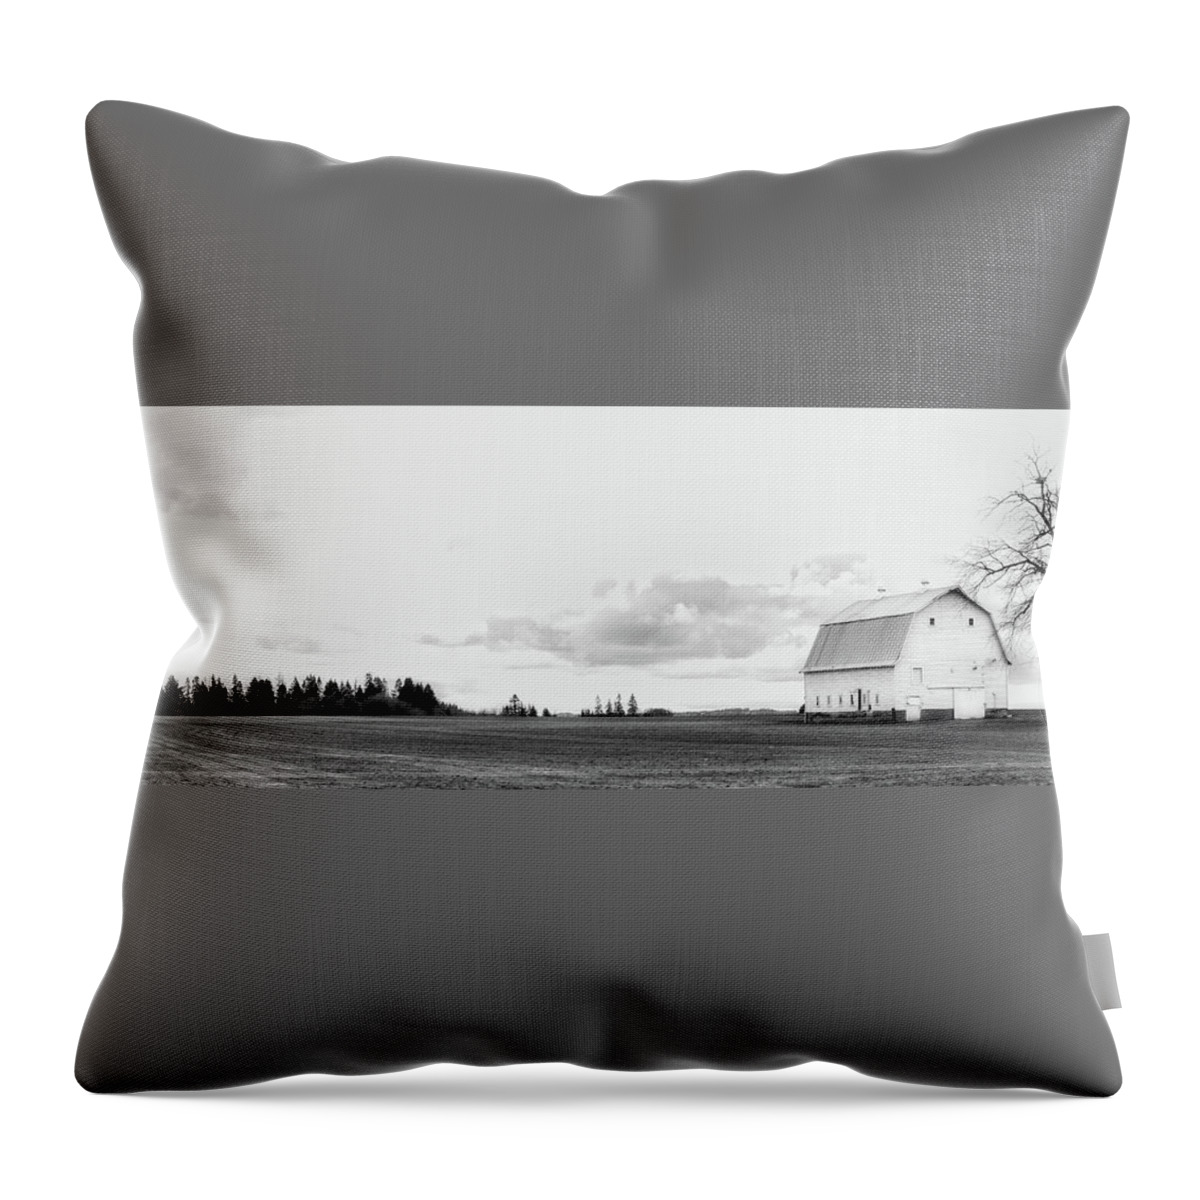 Barn Throw Pillow featuring the photograph The White Barn by Rebecca Cozart